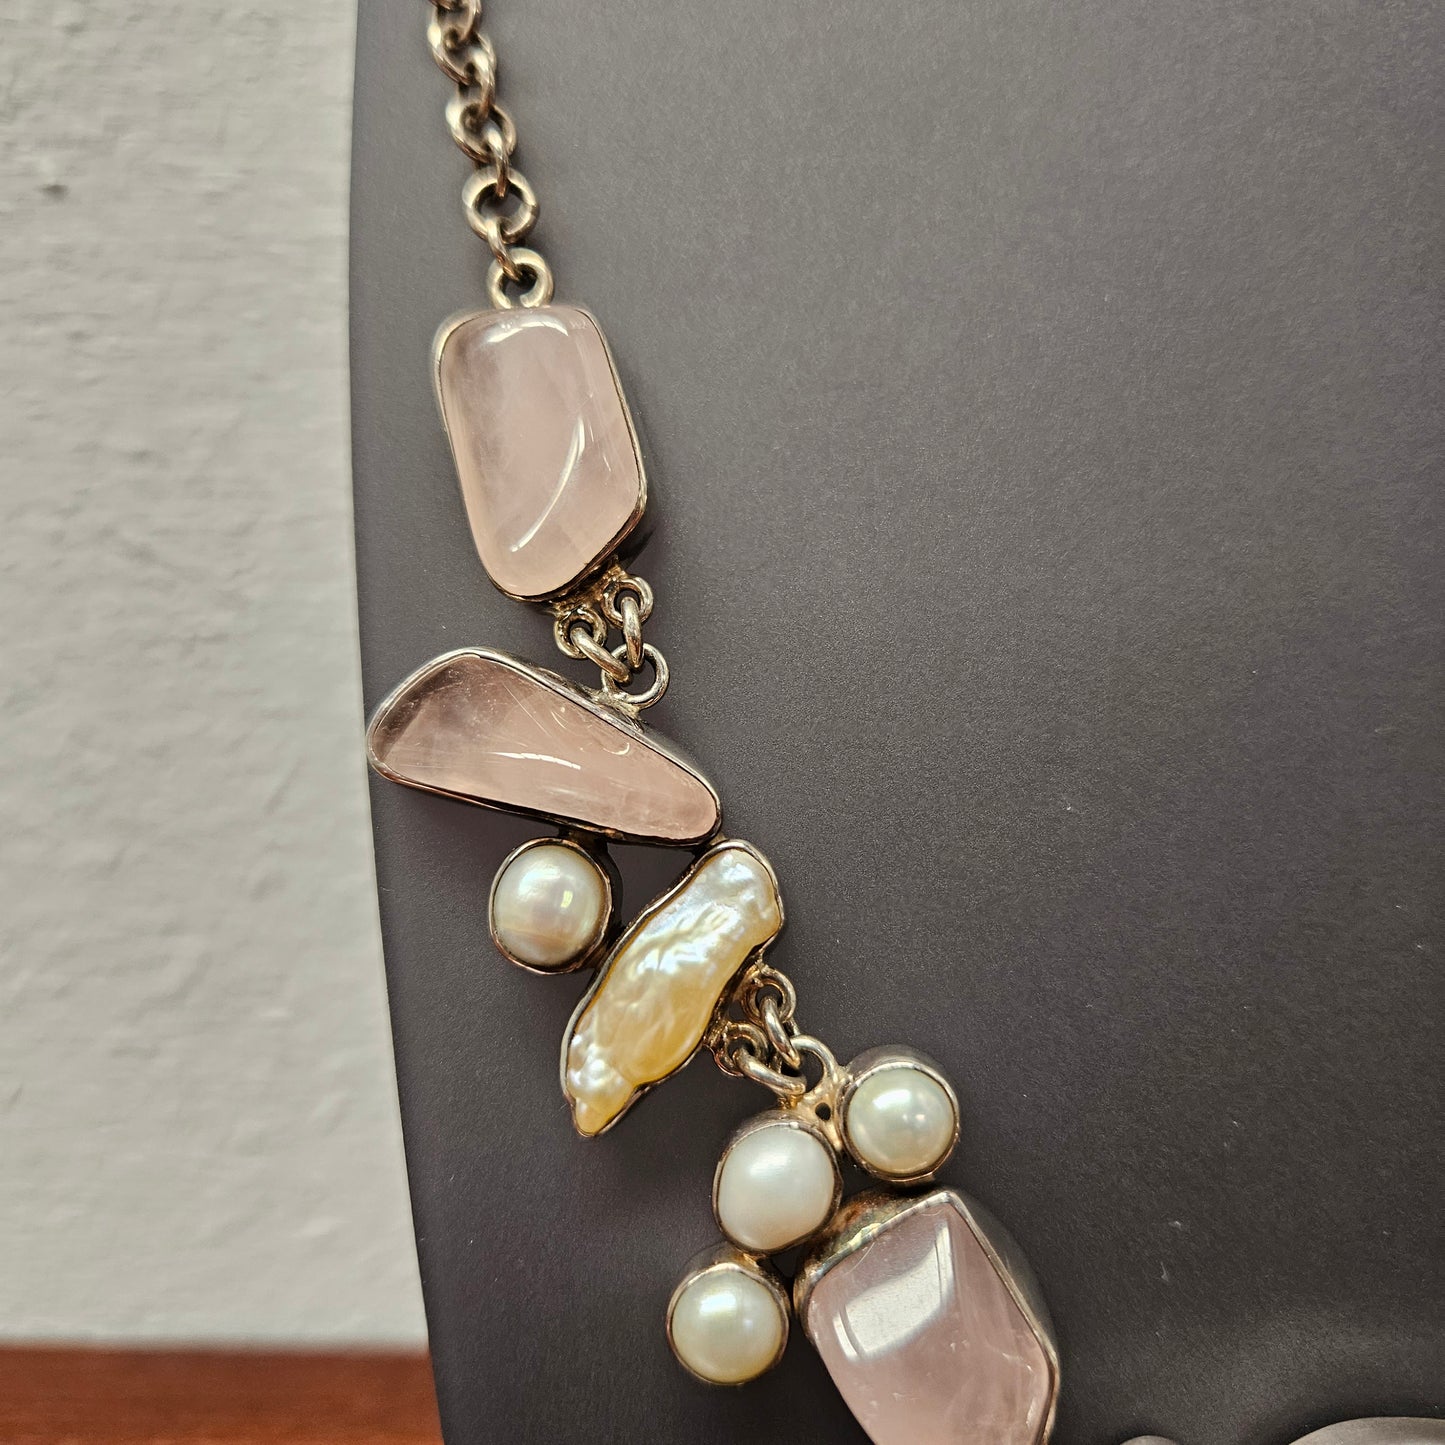 Rose Quartz, Pearl Necklace in Sterling Silver